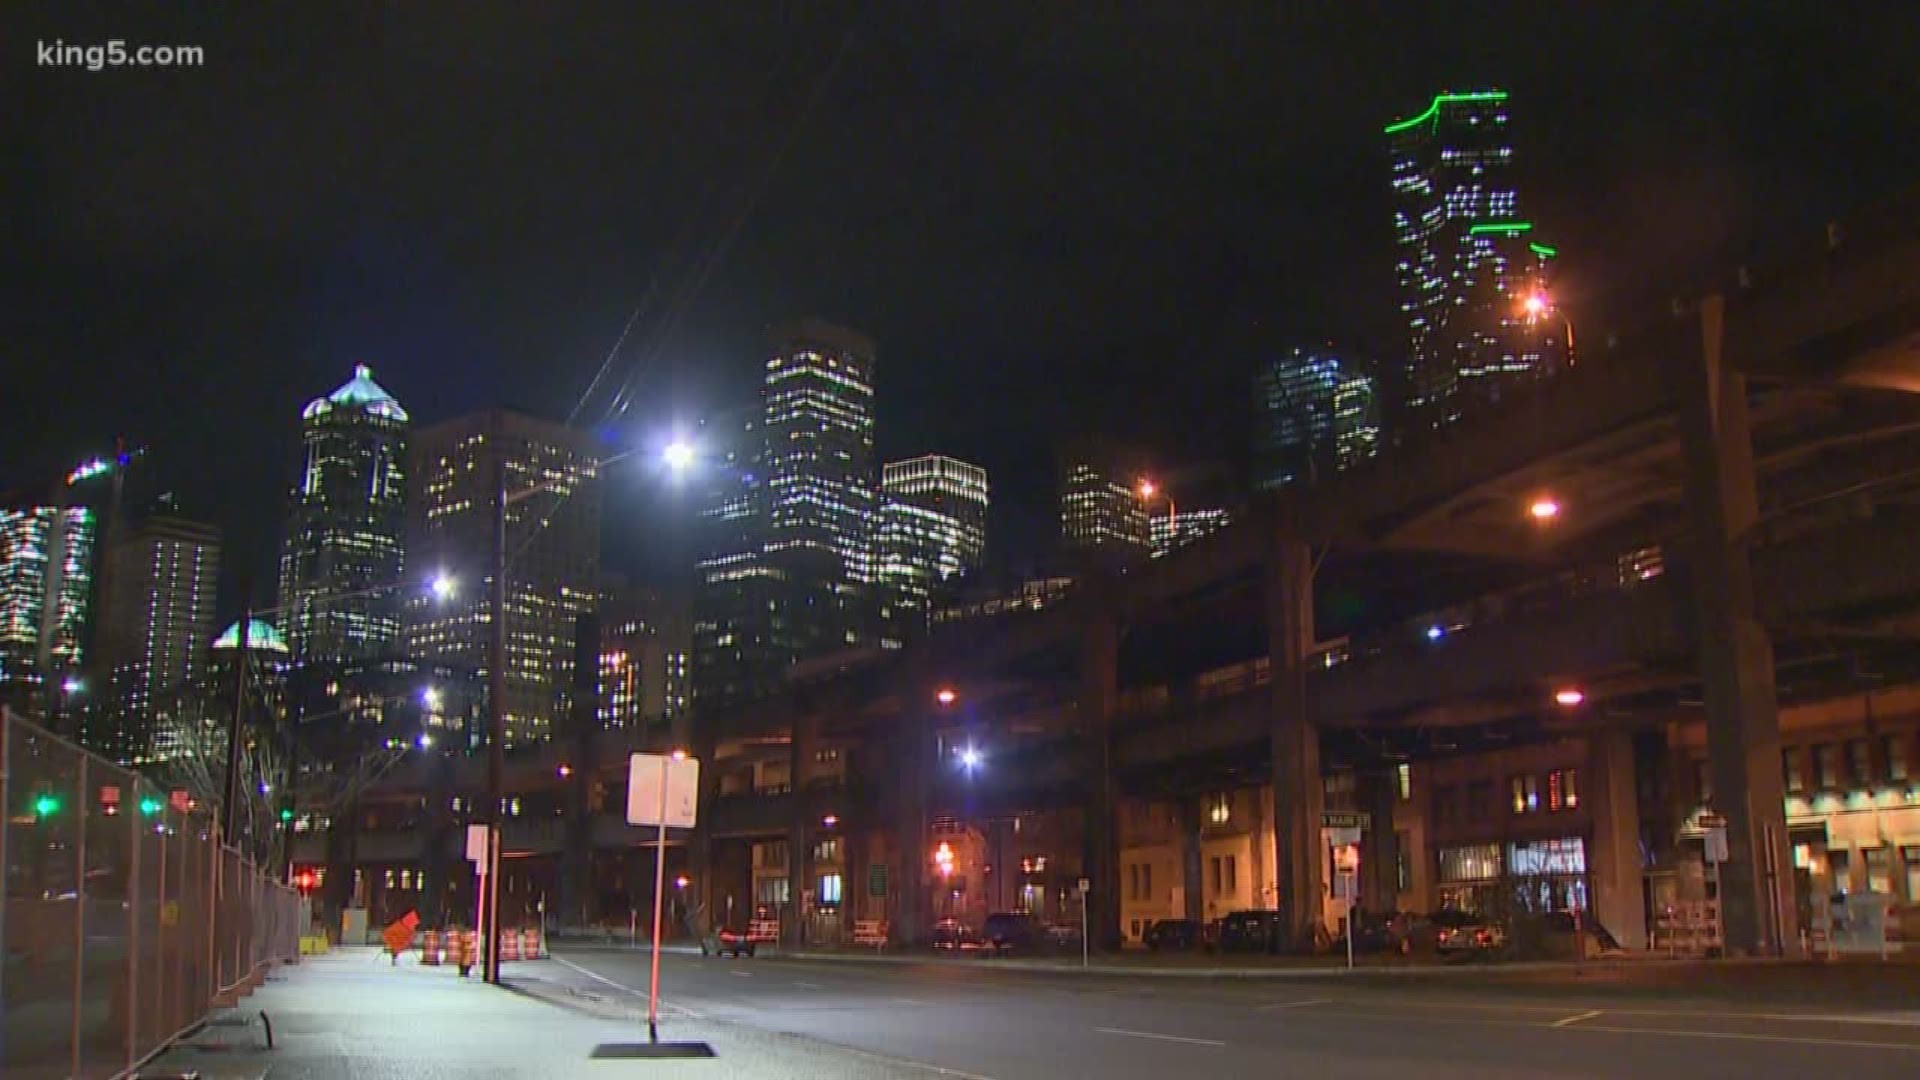 With the clock ticking down for the Alaskan Way Viaduct, many are taking time to remember a piece of a Seattle's history. KING 5's Michael Crowe caught up with some of them as they said goodbye.